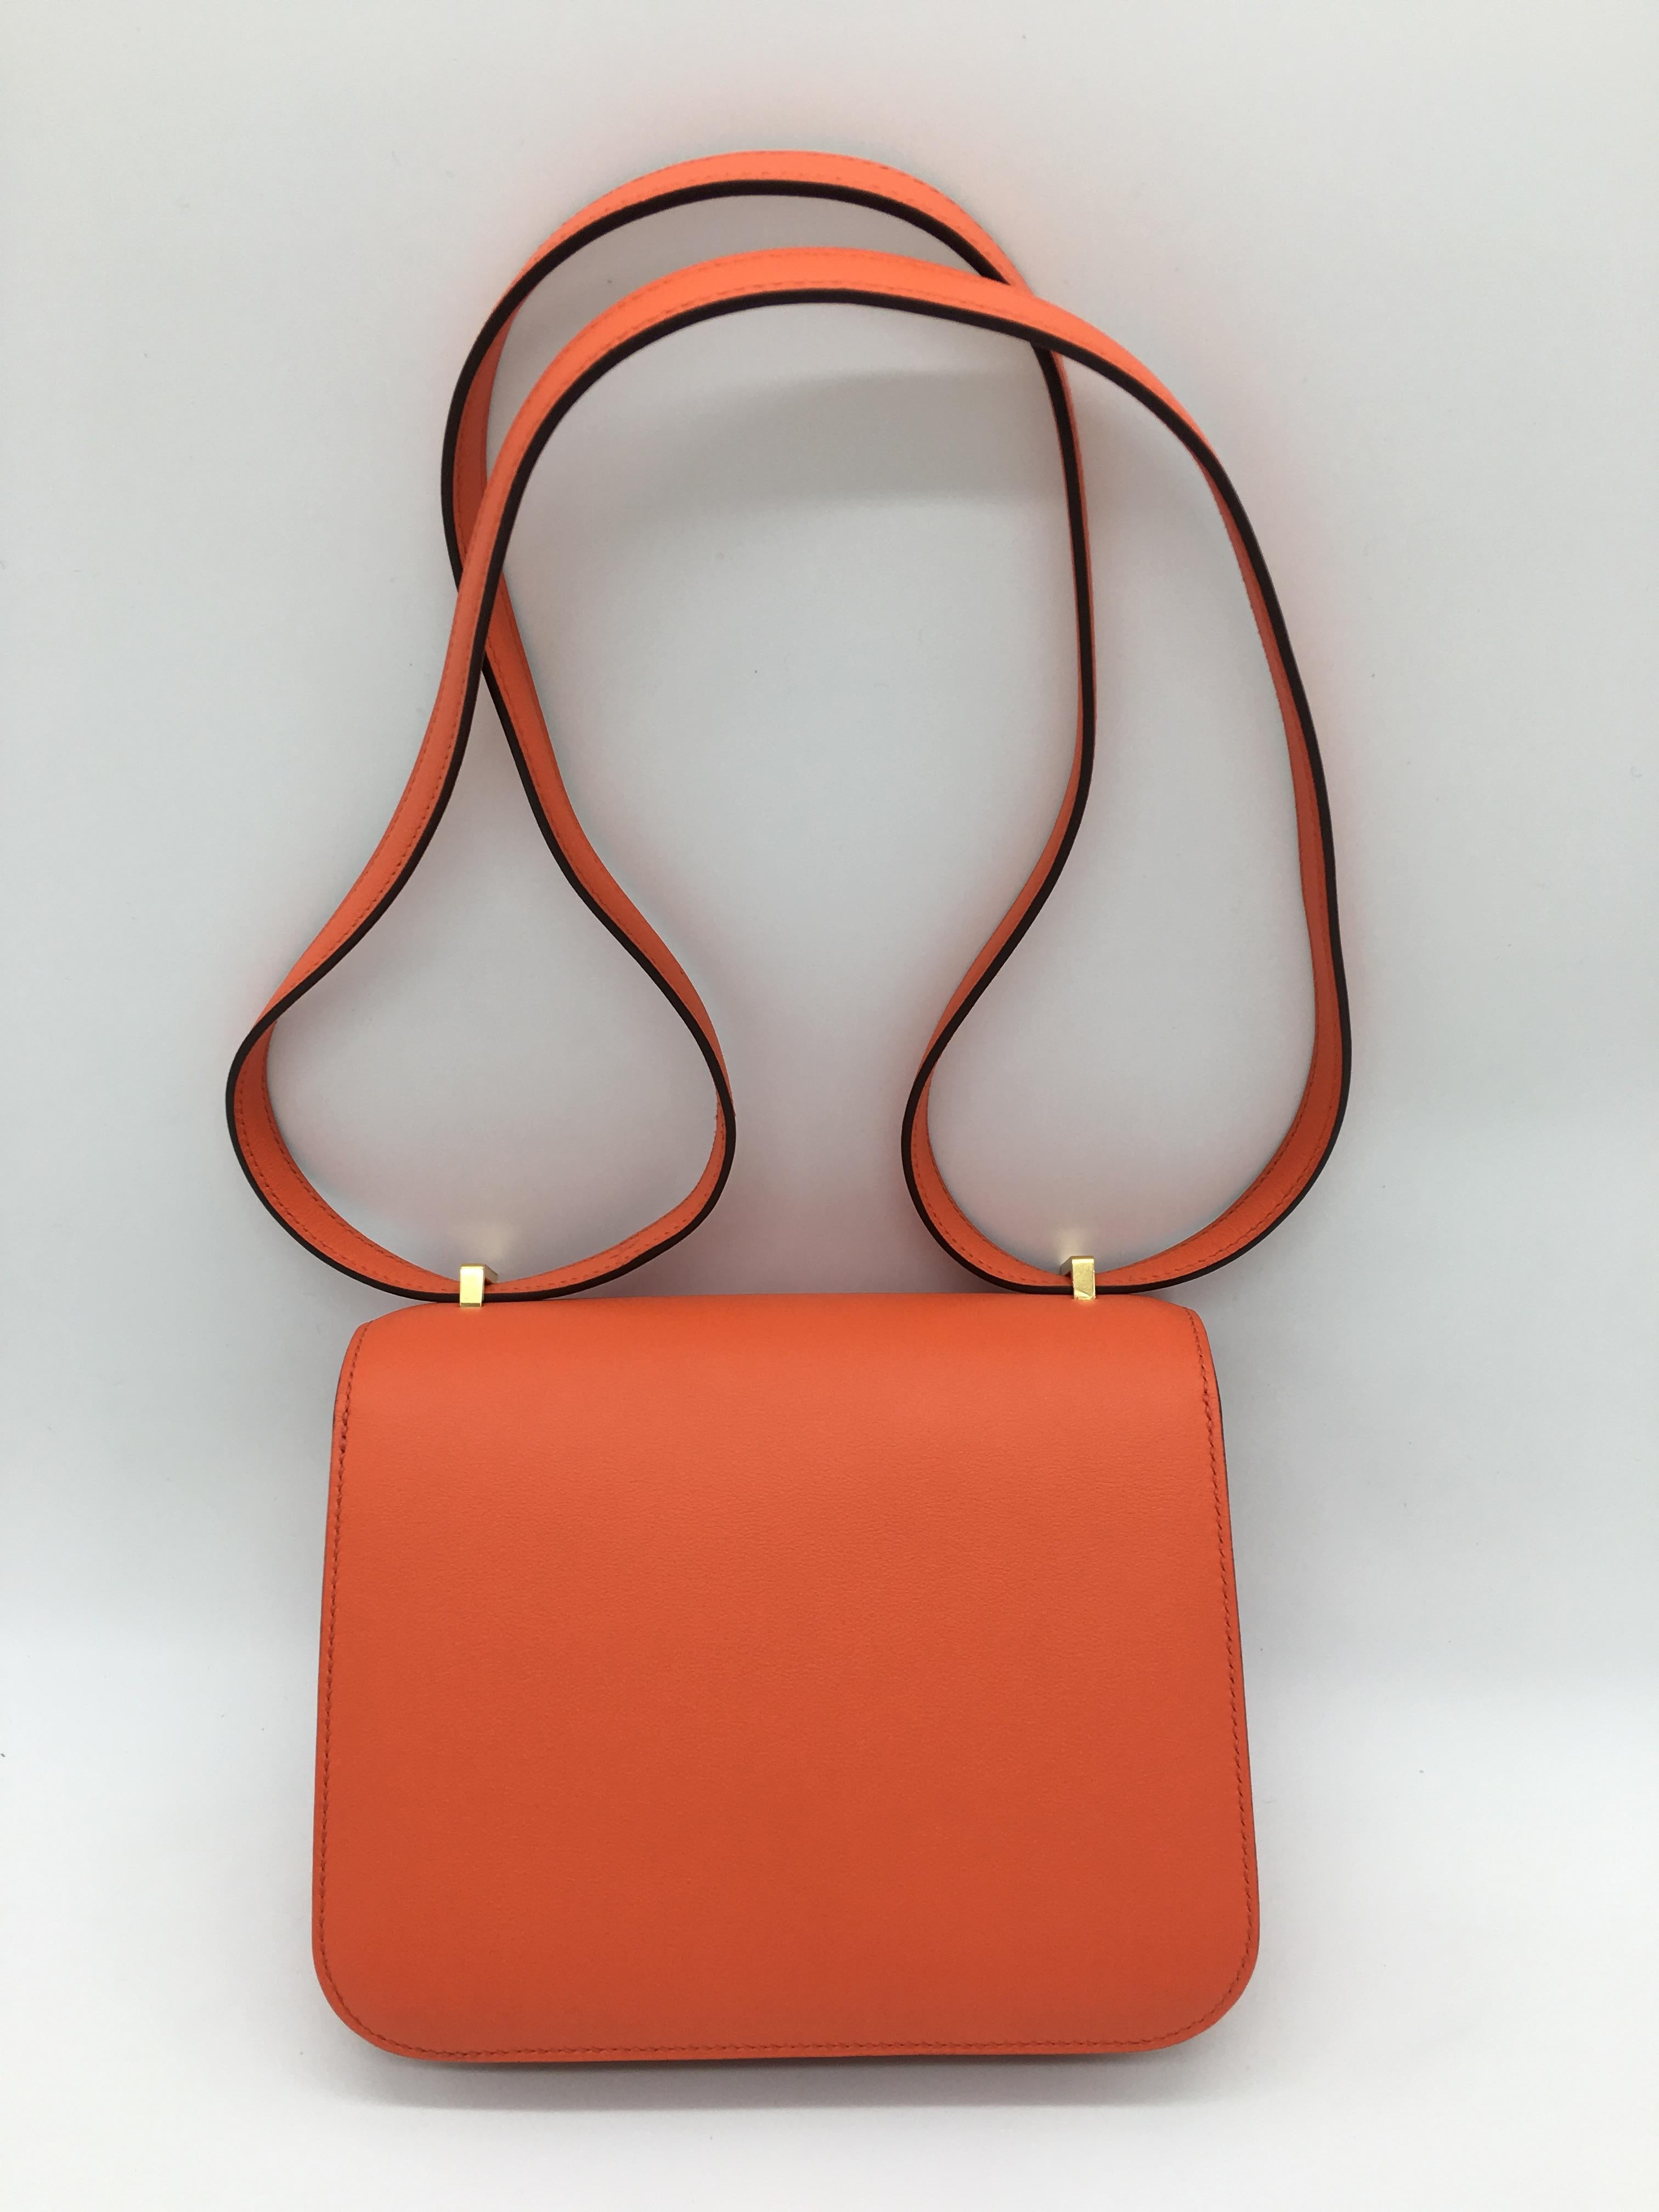 Adapted from the original 1959 Constance design, this scaled down version is a great little bag for evening wear, and in this cheerful Orange Poppy shade is perfect for brightening up any occasion.  This Mini Constance is in Swift Leather with Gold